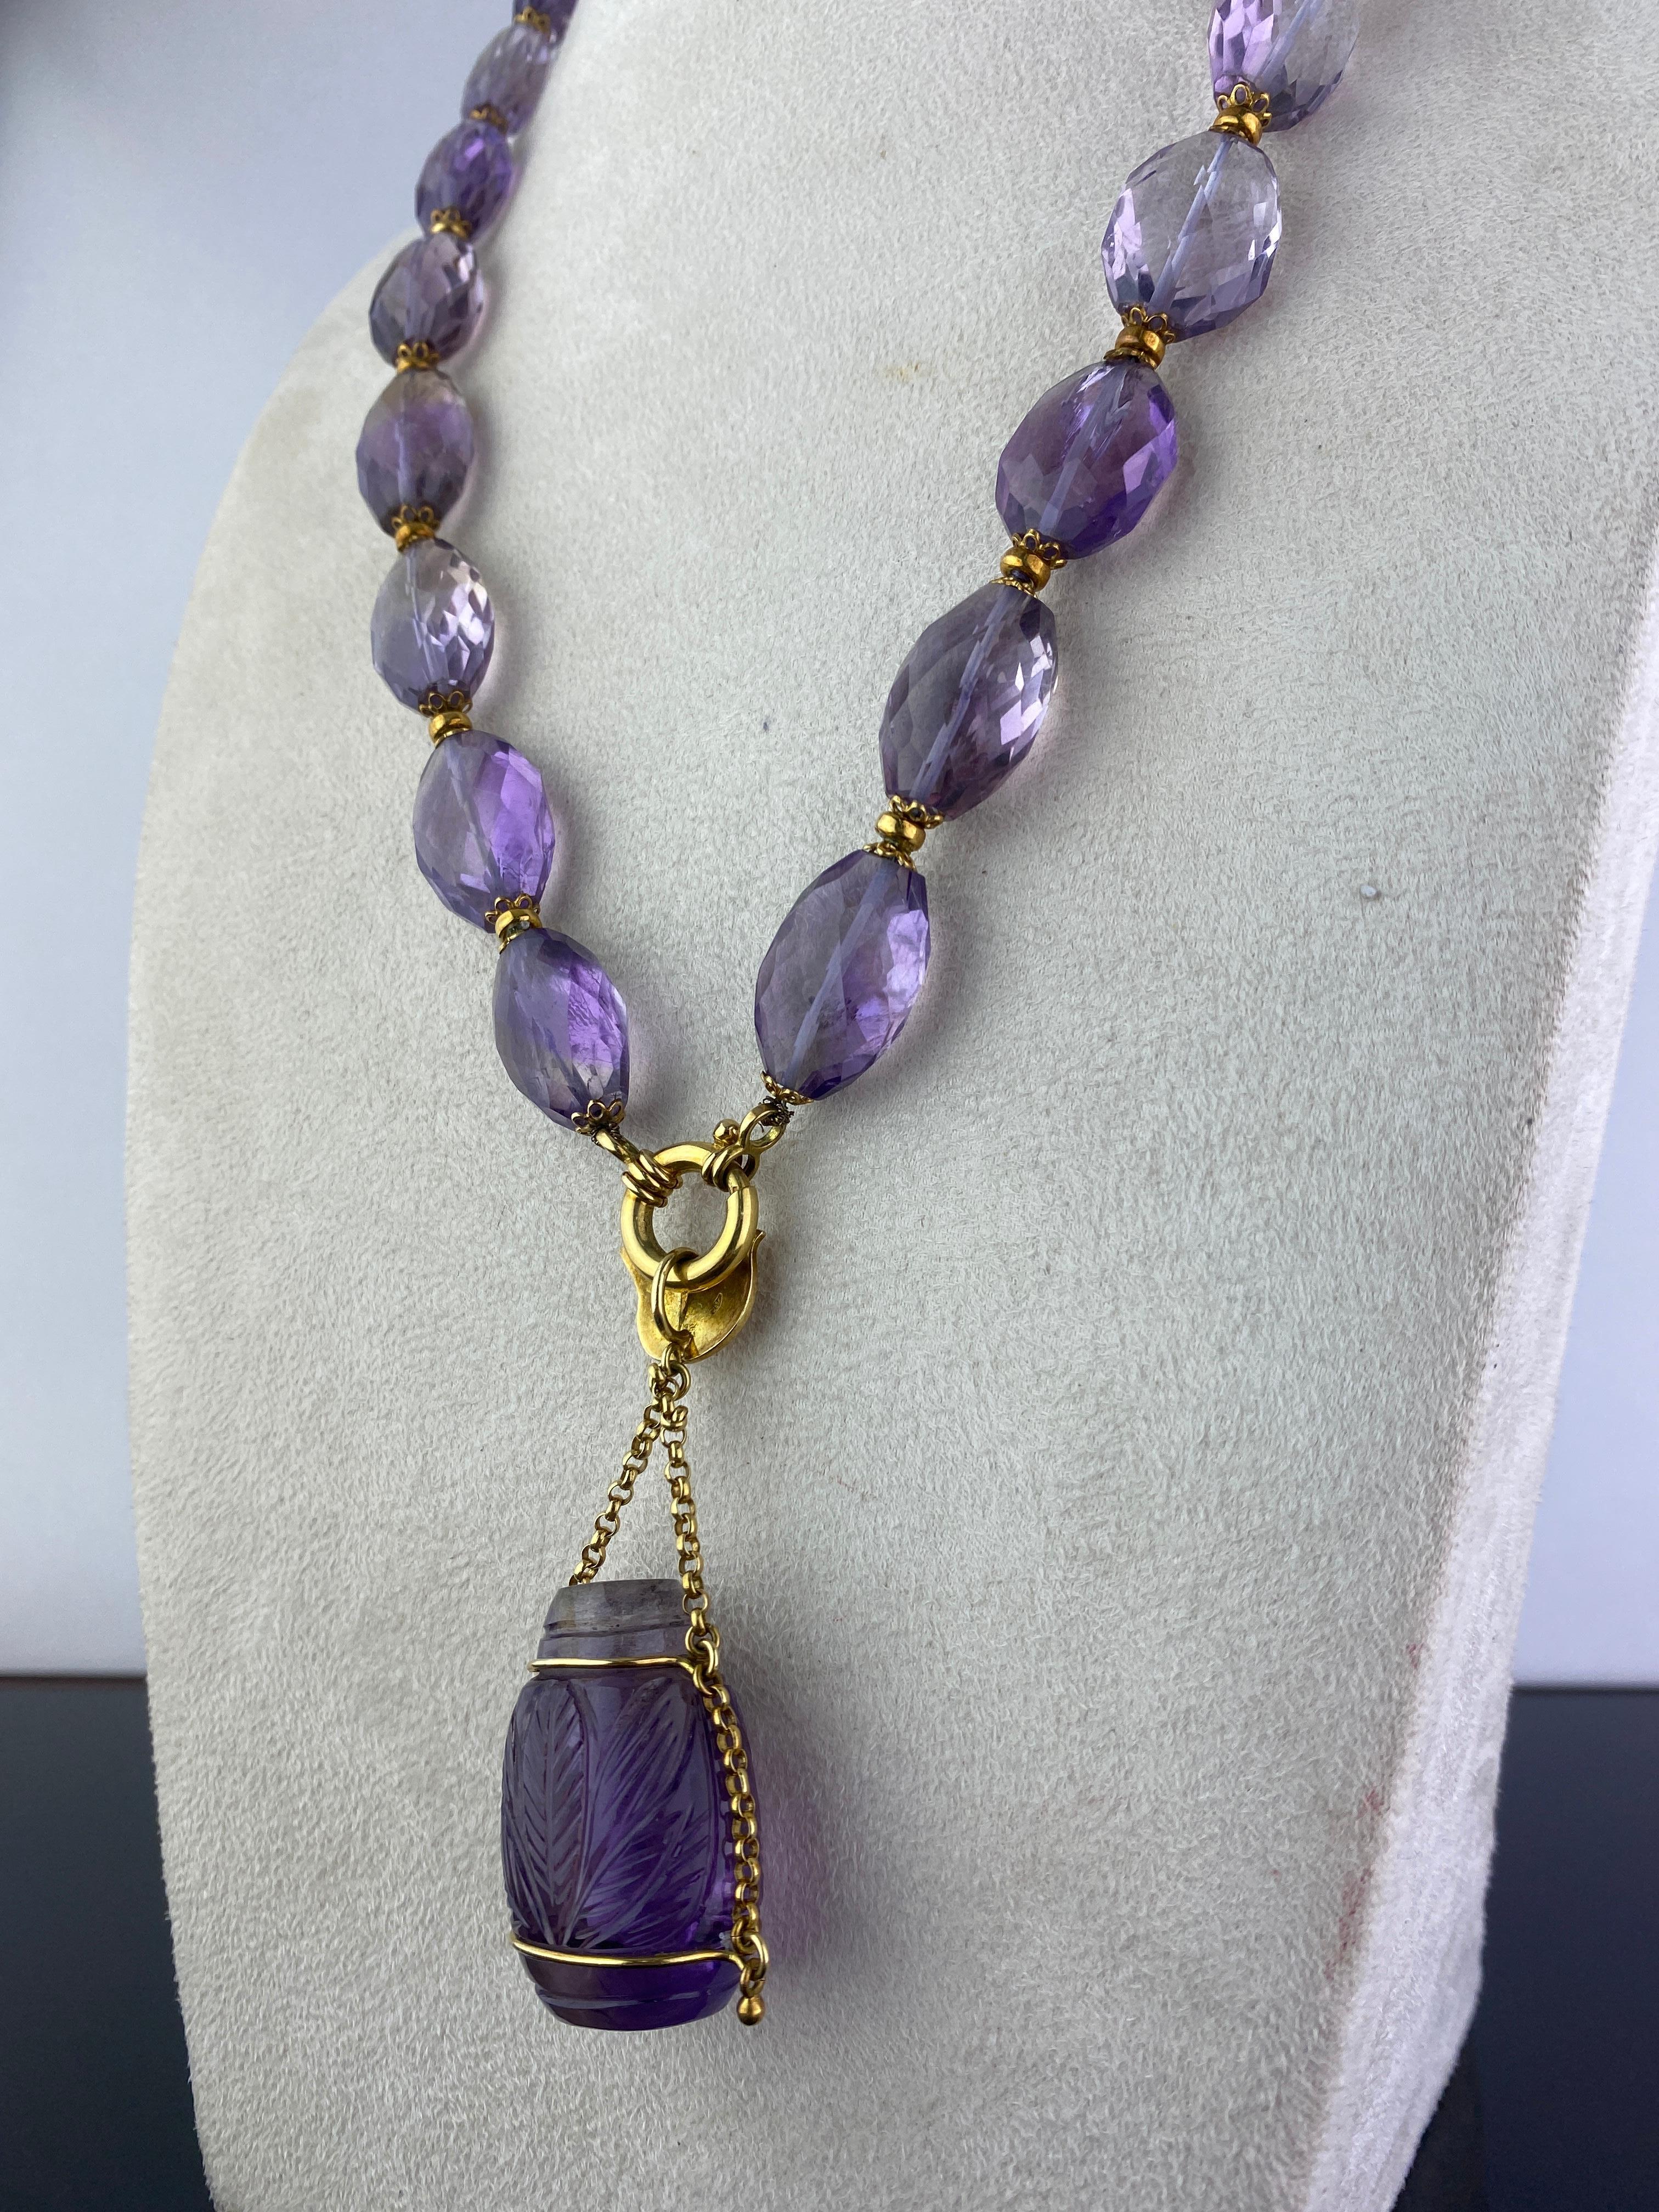 An antique 650 carat Purple Amethyst necklace, with gold. The length of the chain is 22 inches long, with a beautiful carved Amethyst pendant dropping from the necklace. 
Please message for more information. 